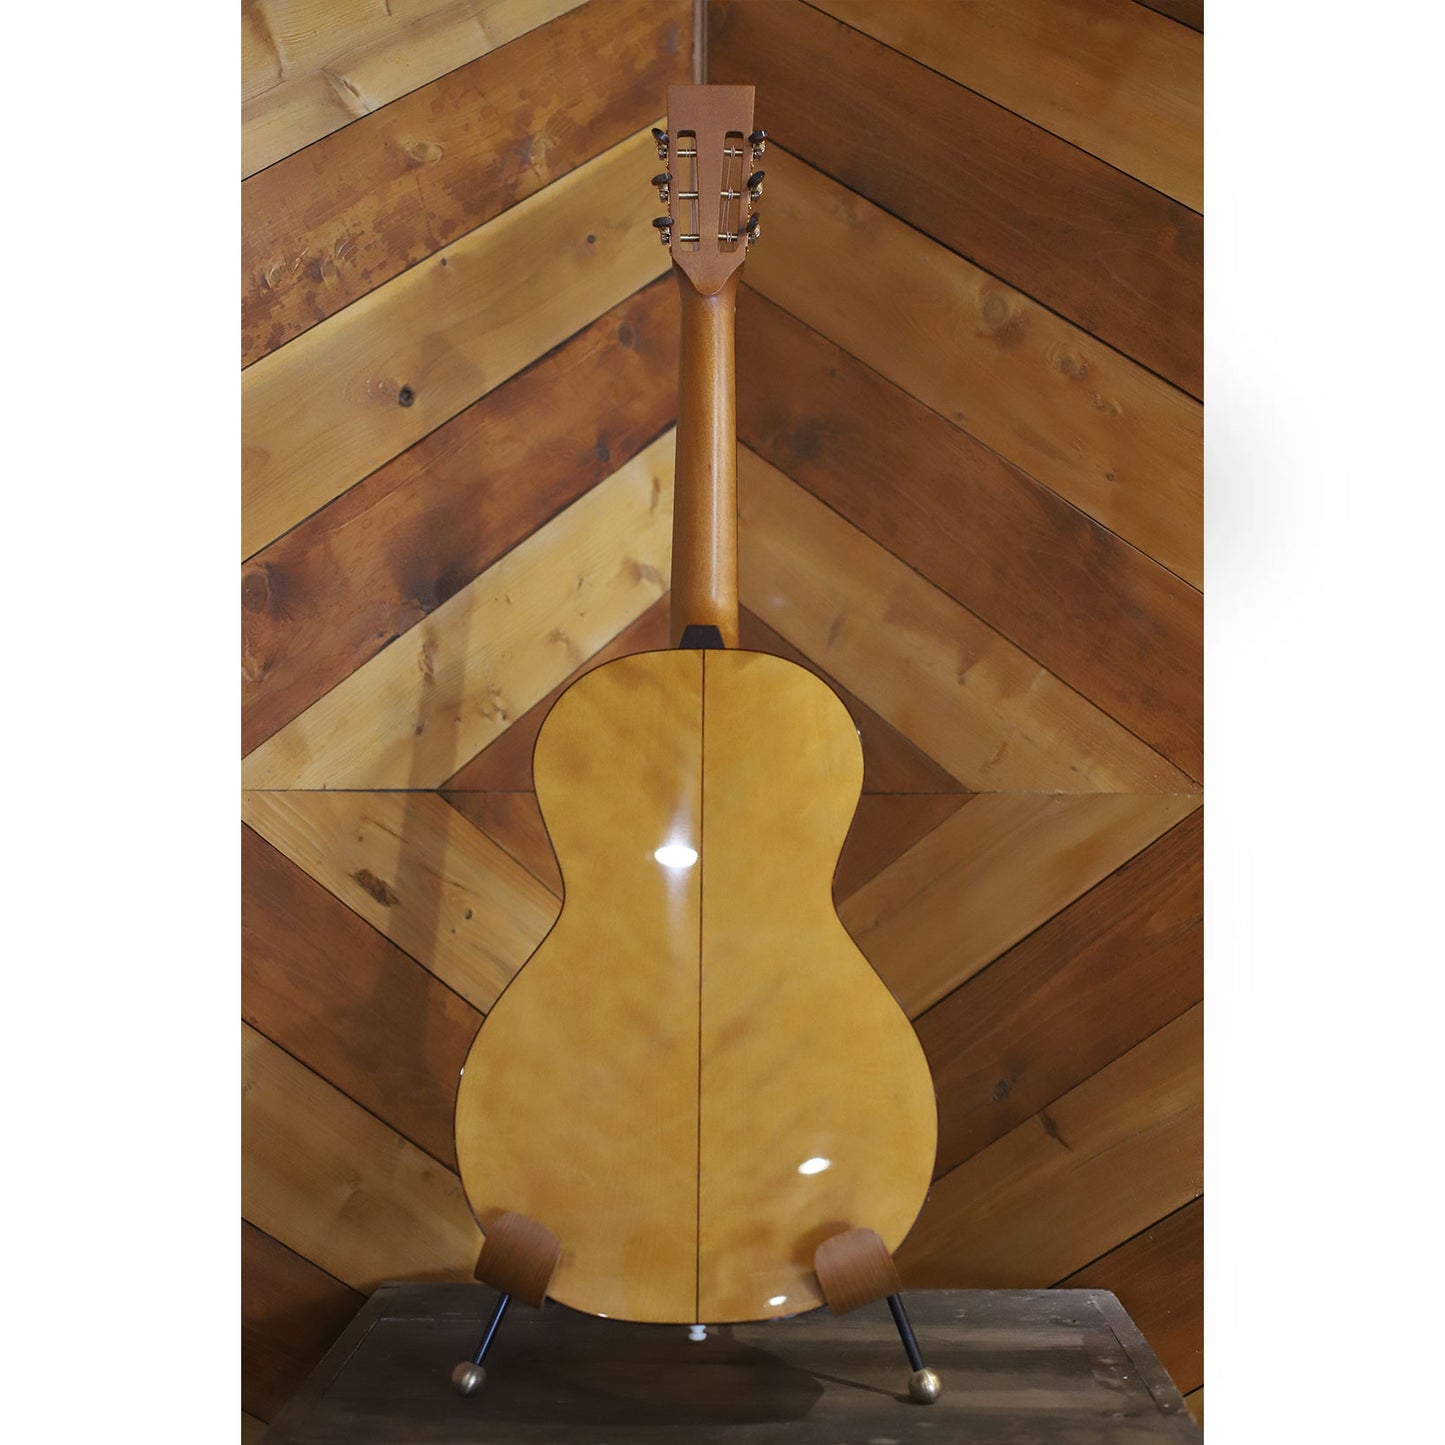 2023 Circle Strings Parlor Red Spruce/Cypress